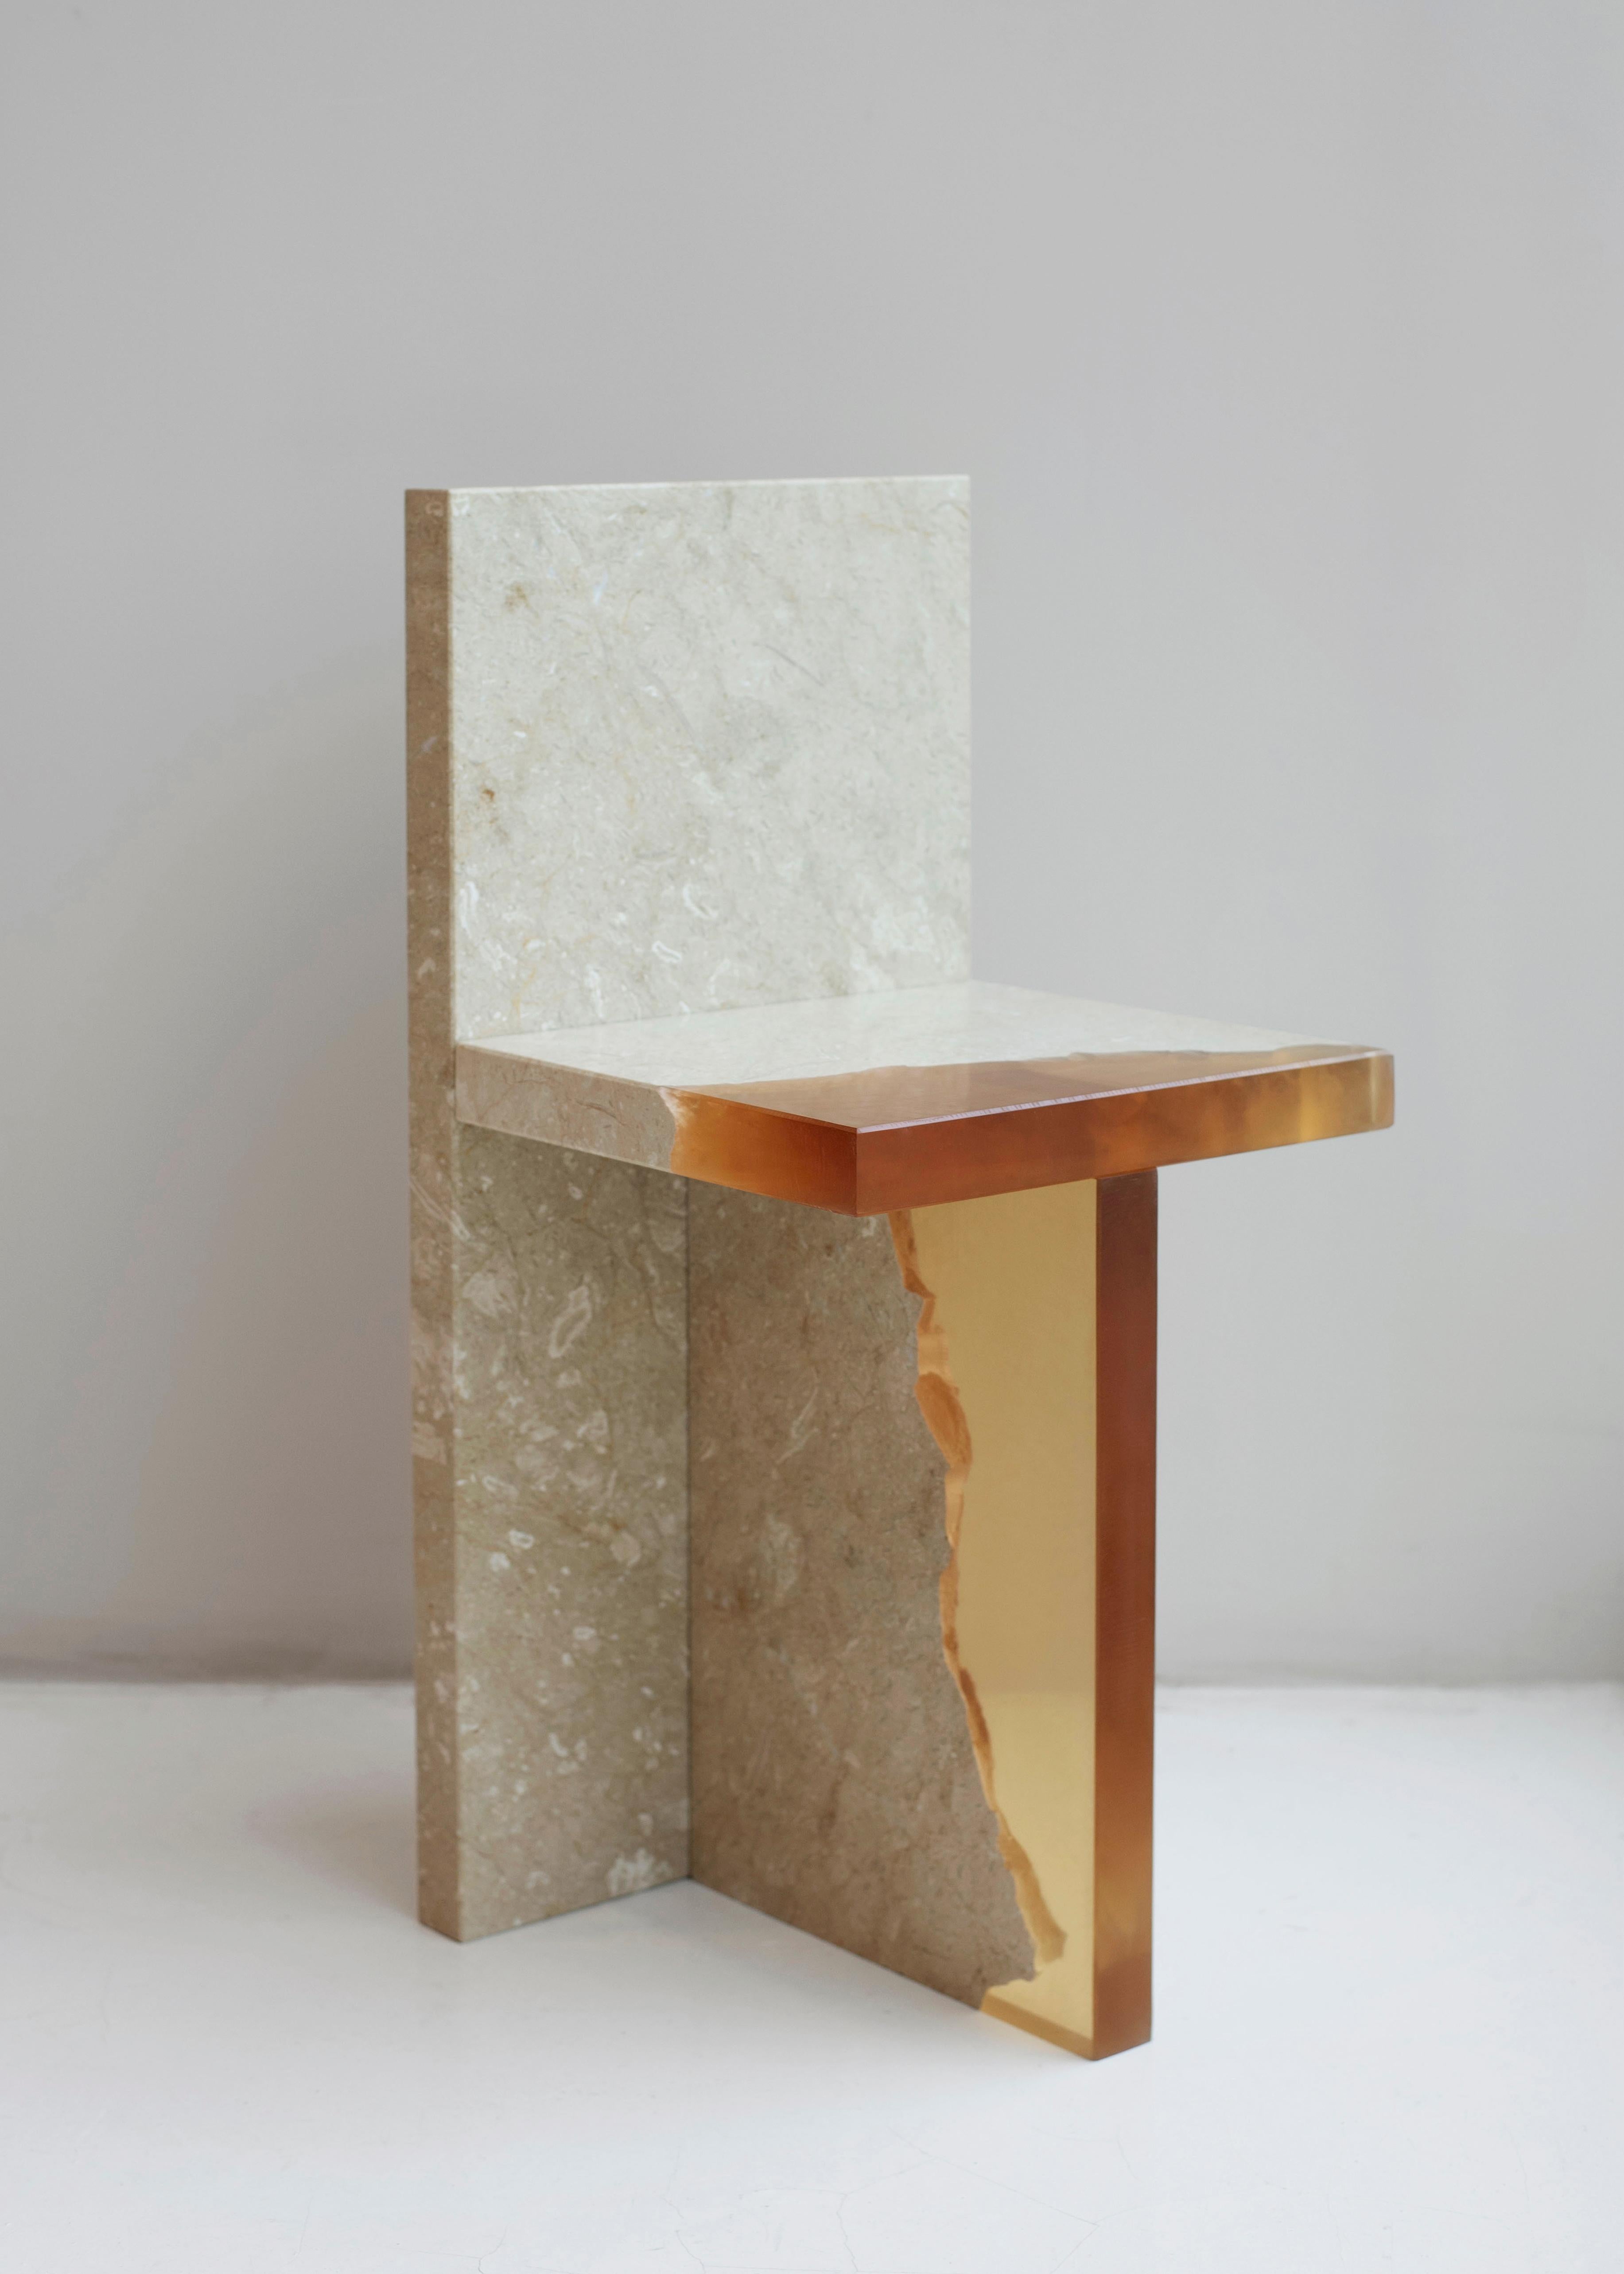 Crystal resin and marble, fragment chair, Jang Hea Kyoung
Artist: Jang Hea Kyoung
Materials: Crystal resin and marble
Dimensions: 33 x 34 x 74 cm

Jang Hea Kyoung is based in Seoul, Republic of Korea. She searches for craft elements and makes